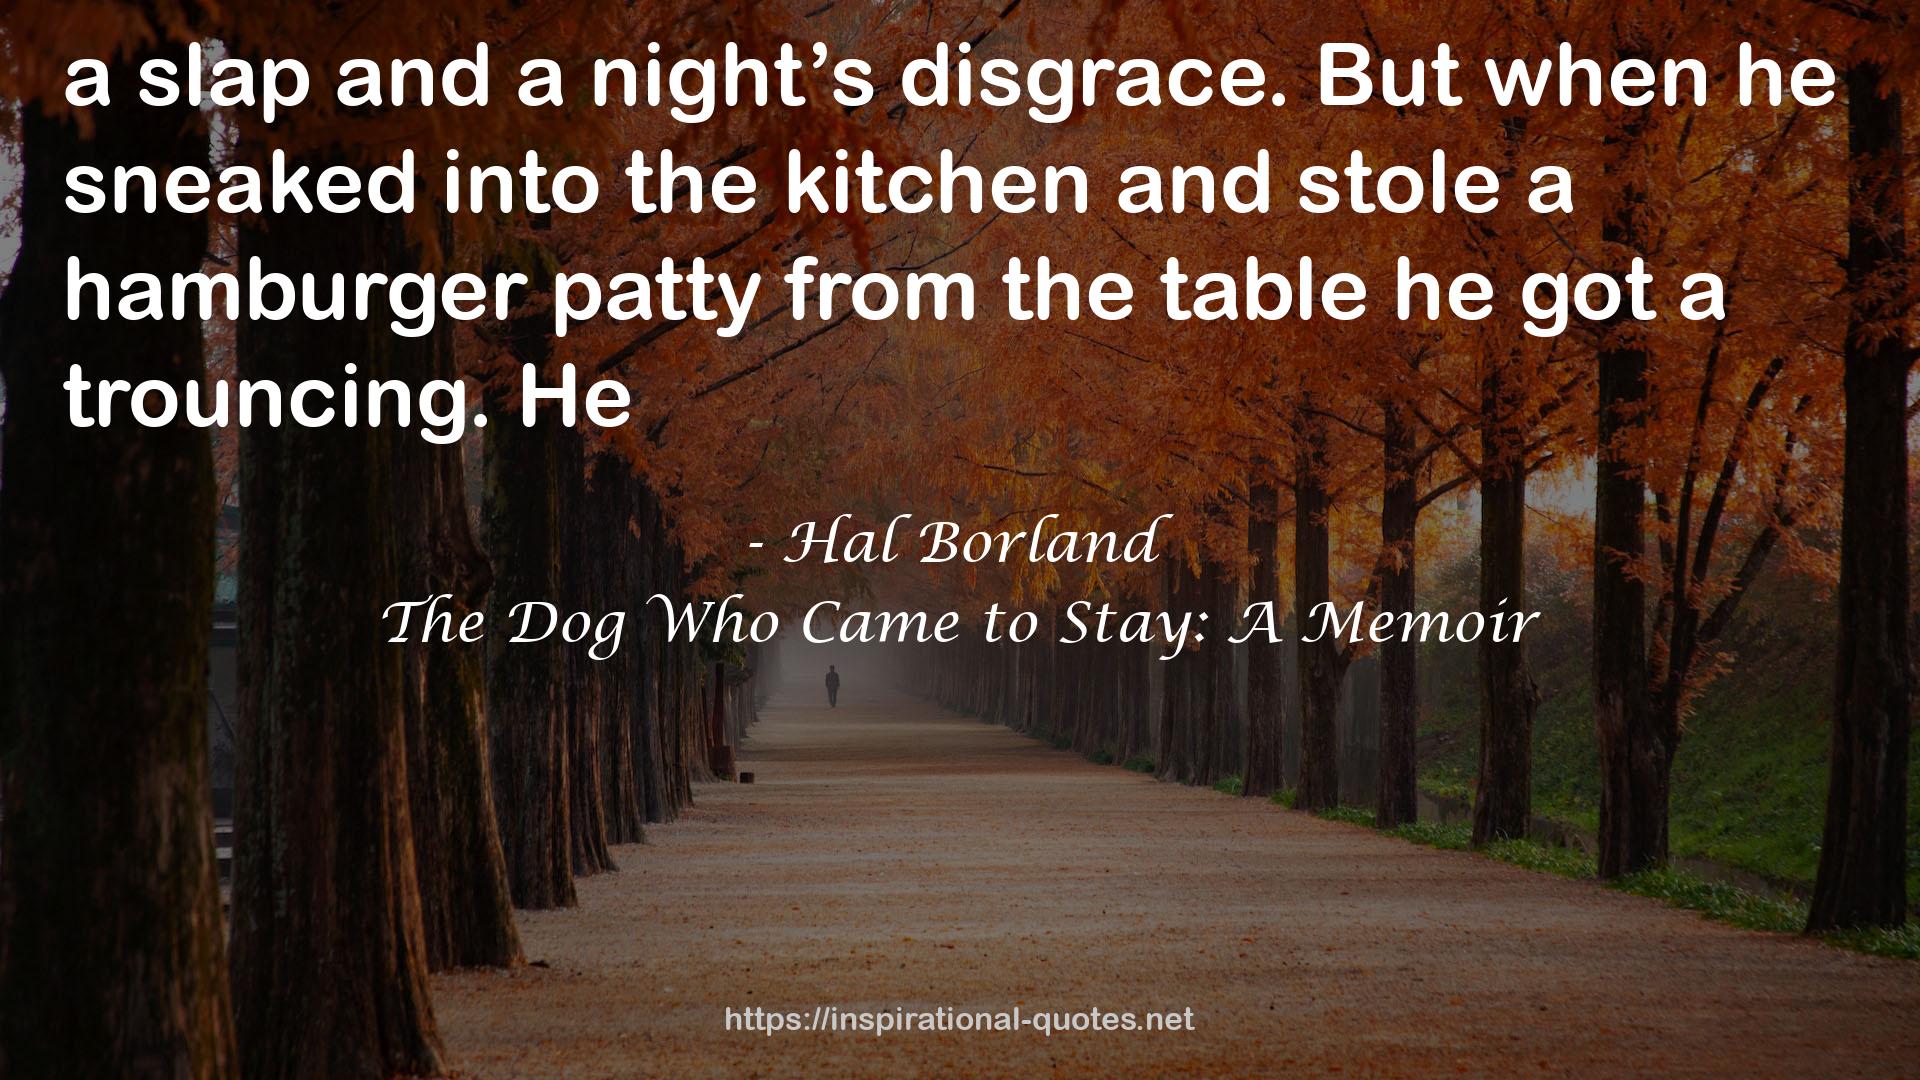 The Dog Who Came to Stay: A Memoir QUOTES